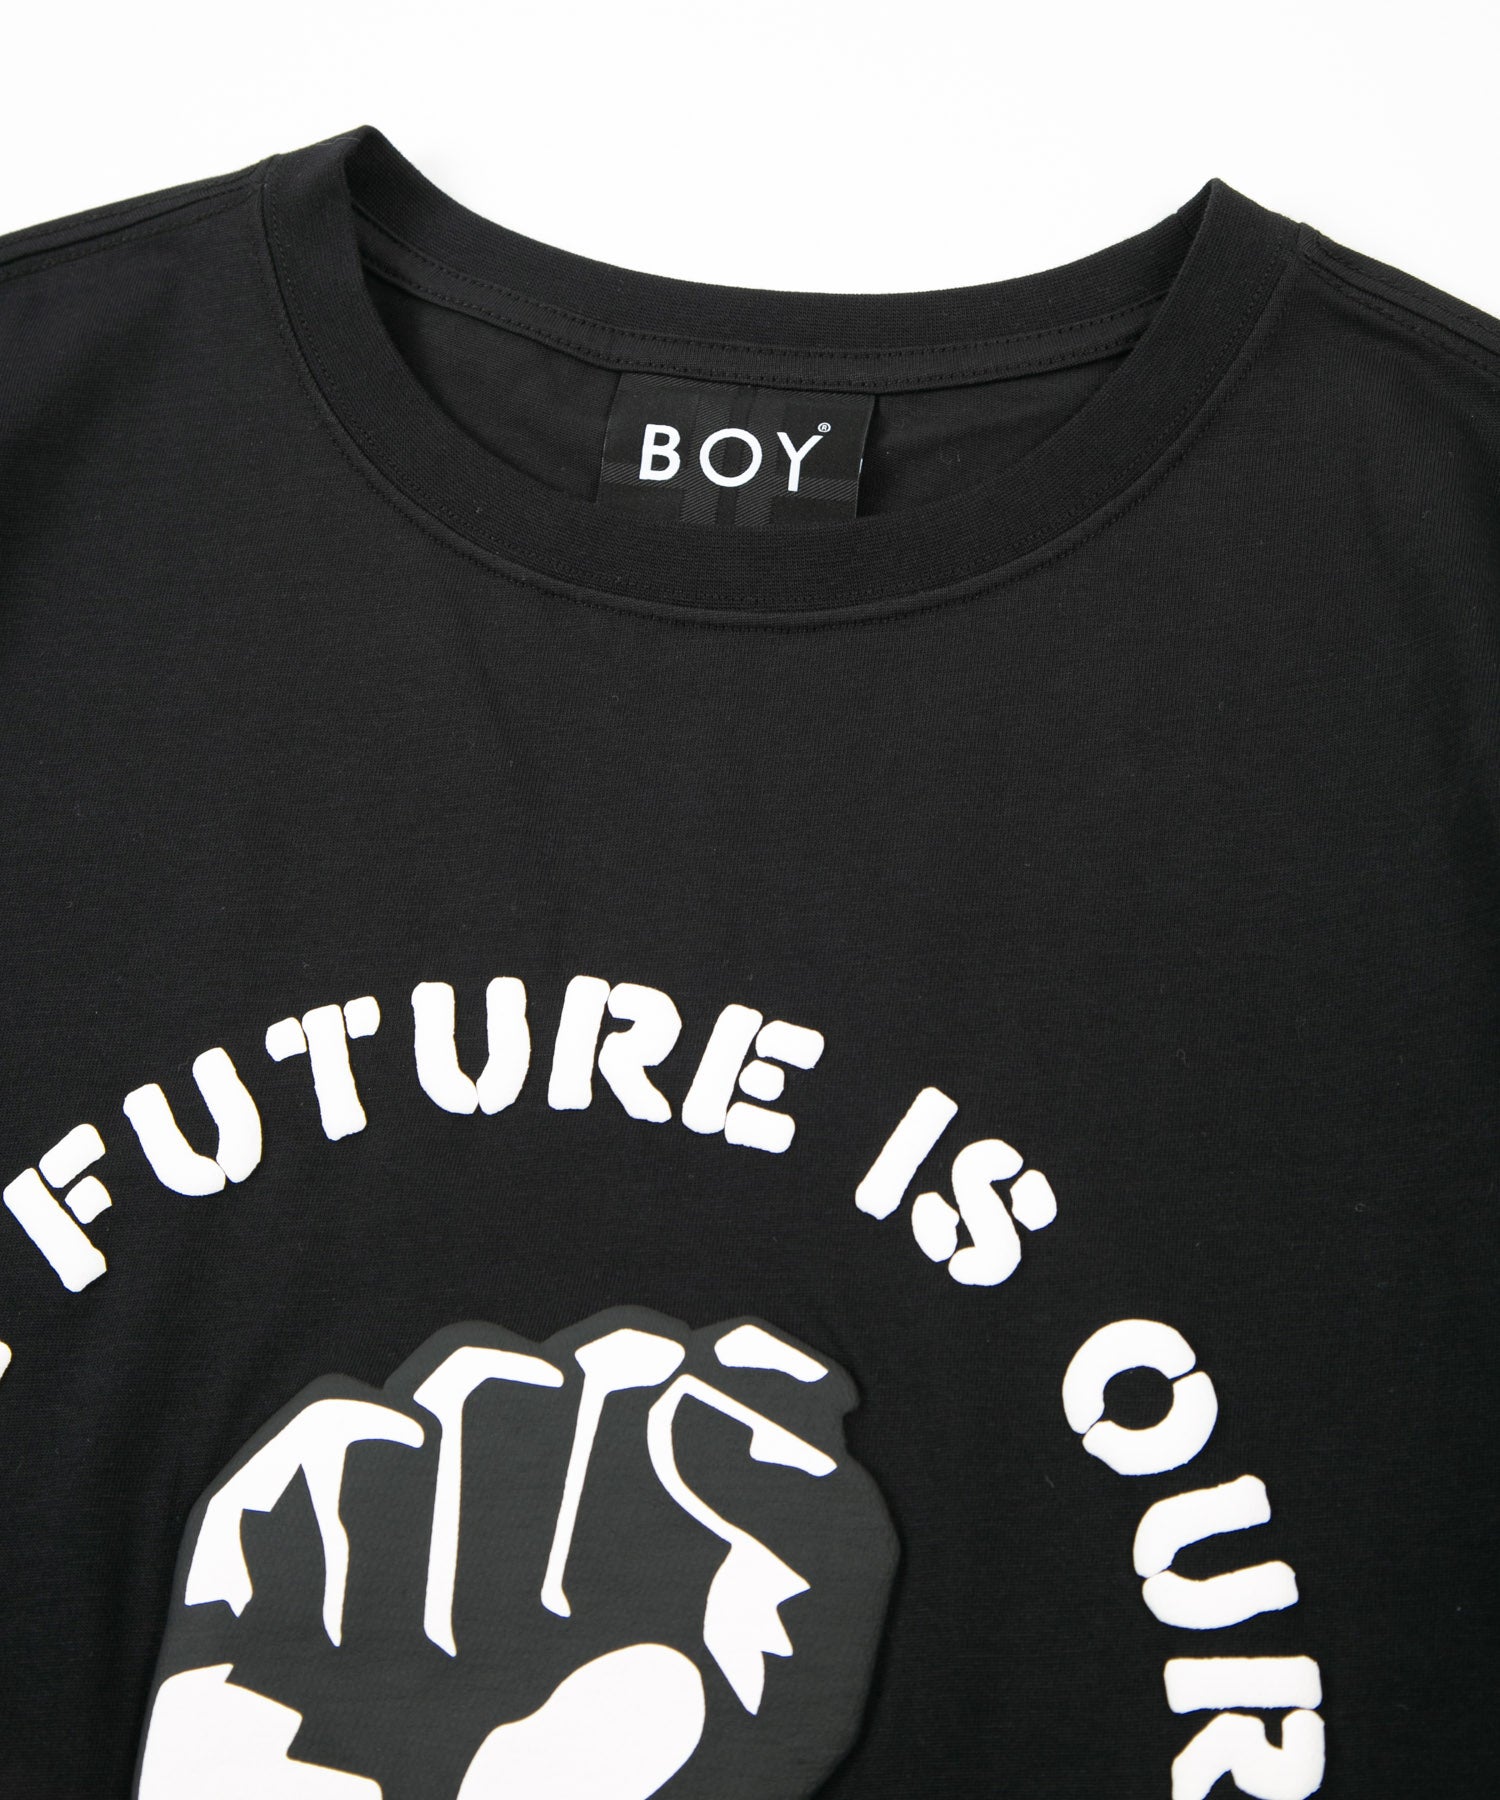 THE FUTURE IS OURS」 TEE BLACK【AFJ-T230302】 – BOY LONDON